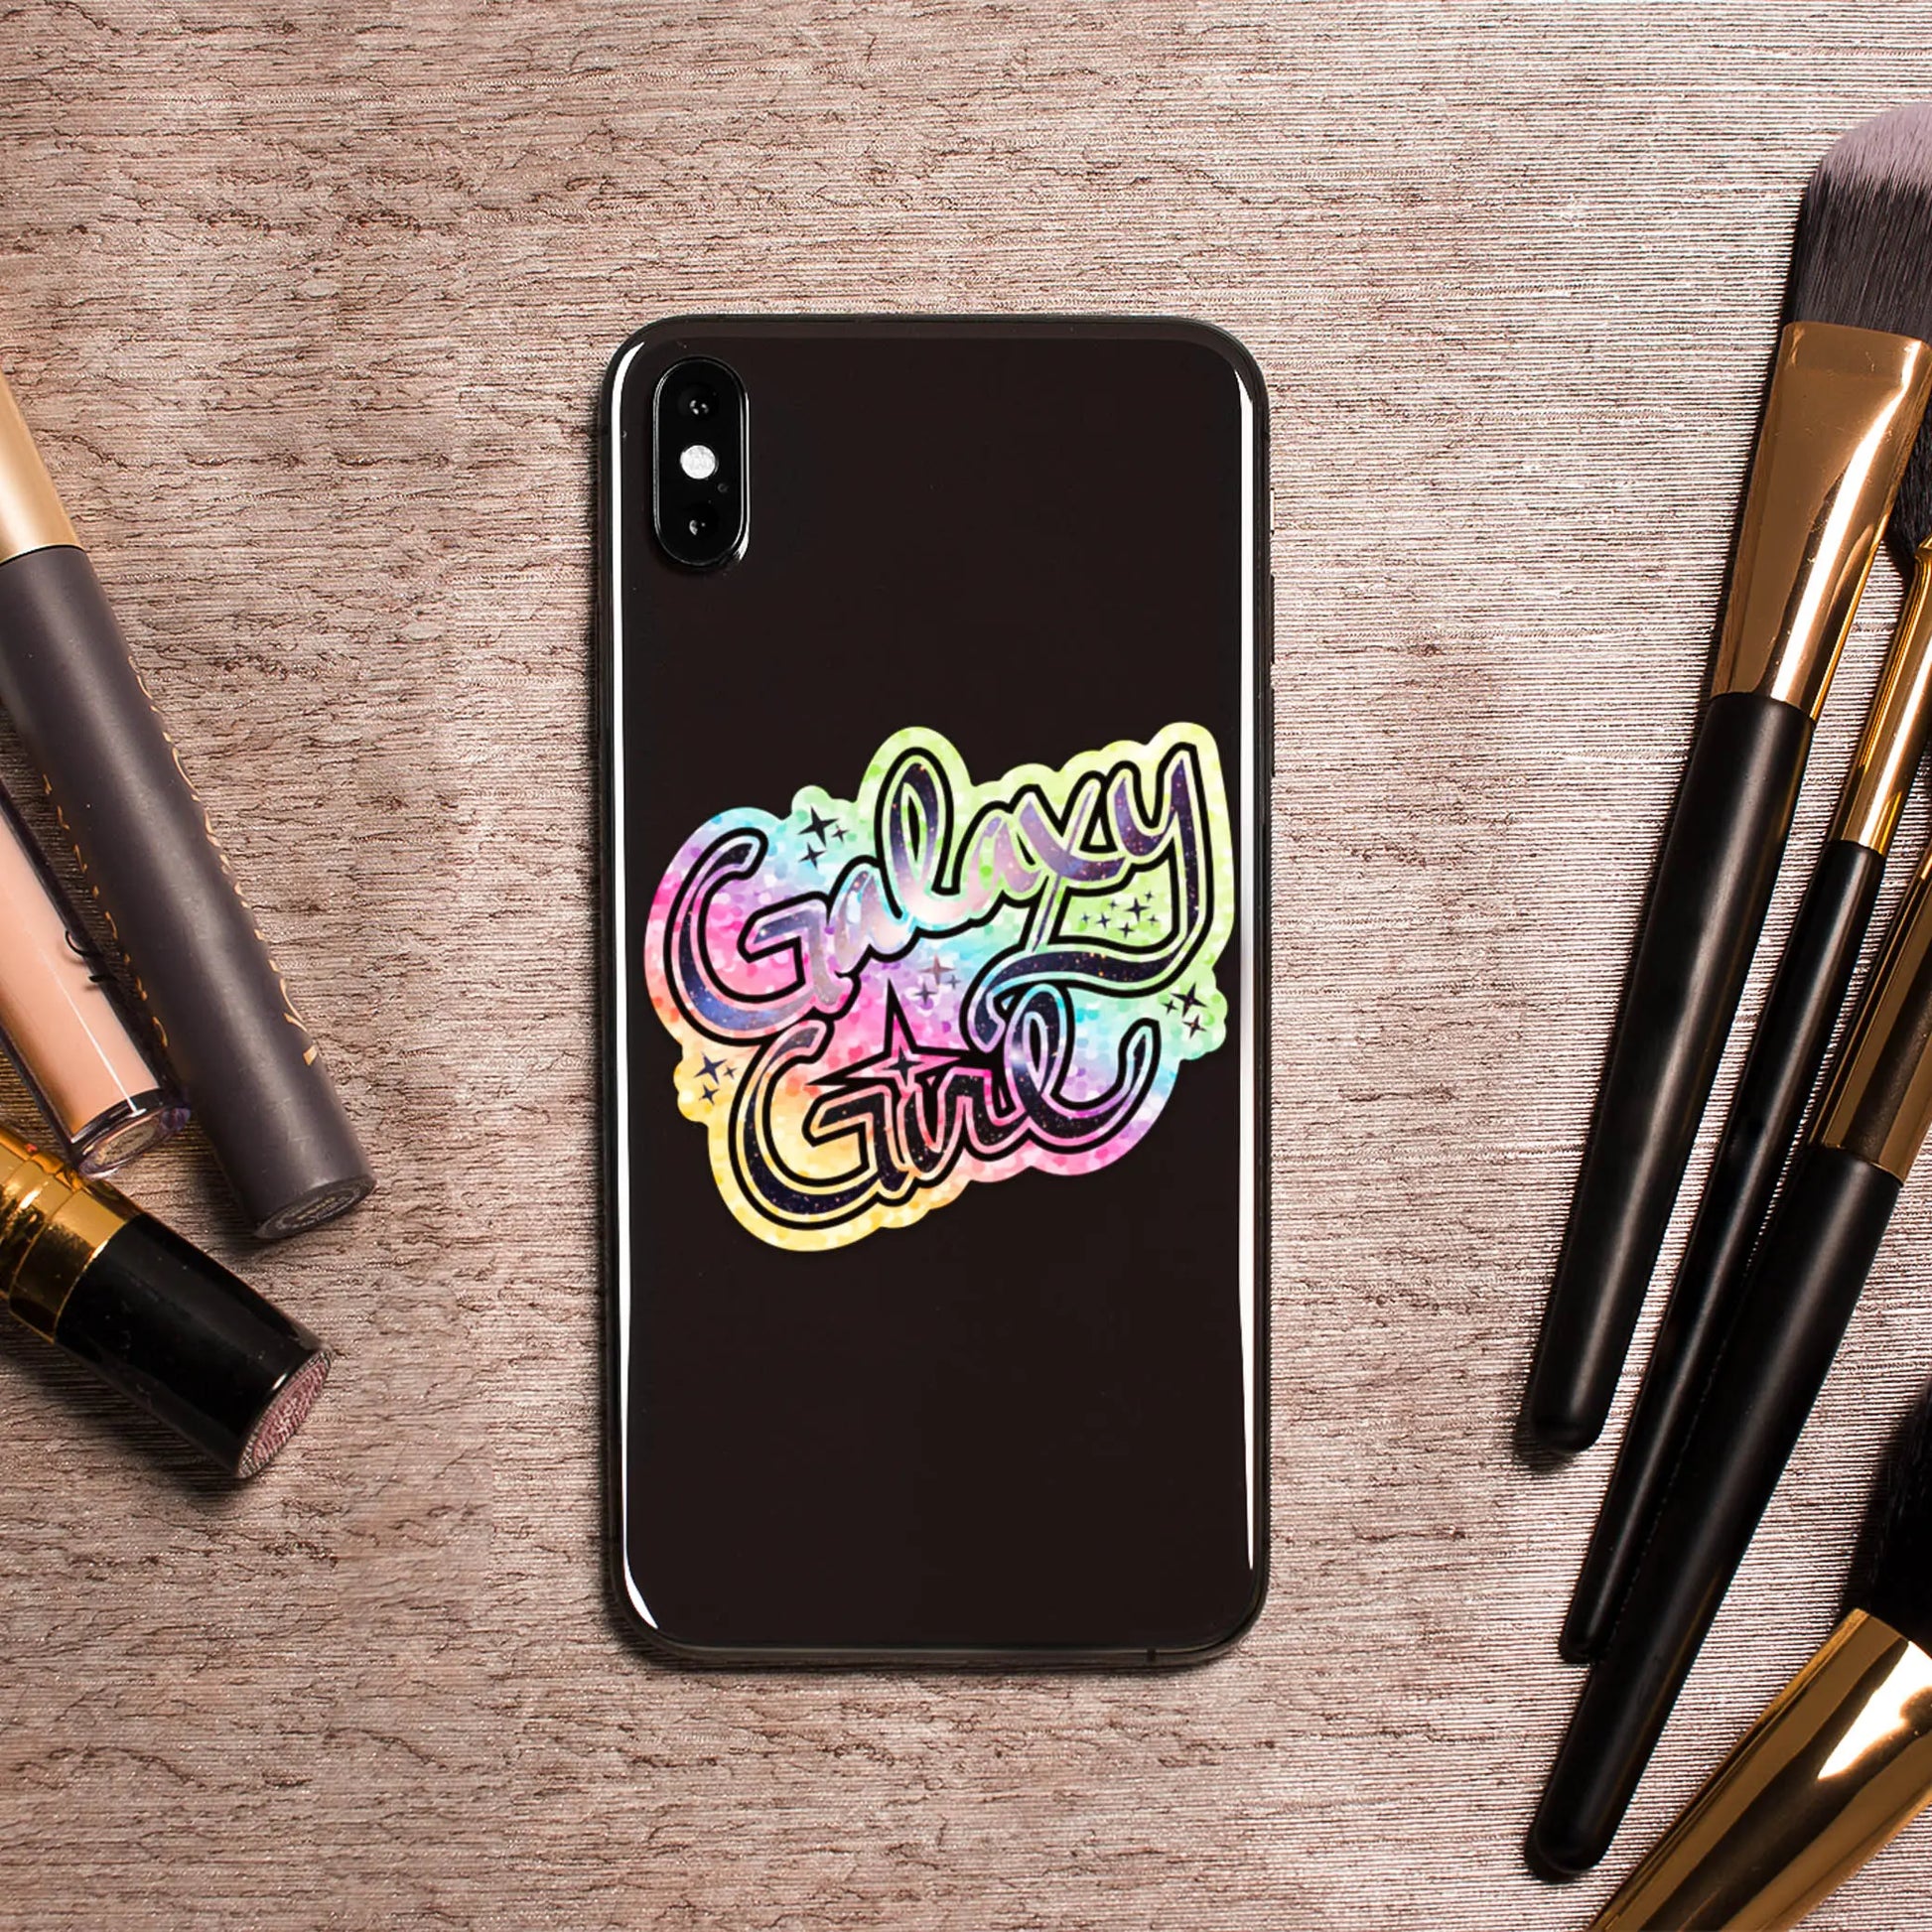 Galaxy Girl Die-Cut Sparkle 3" Vinyl Sticker on phone surrounded by cosmetics